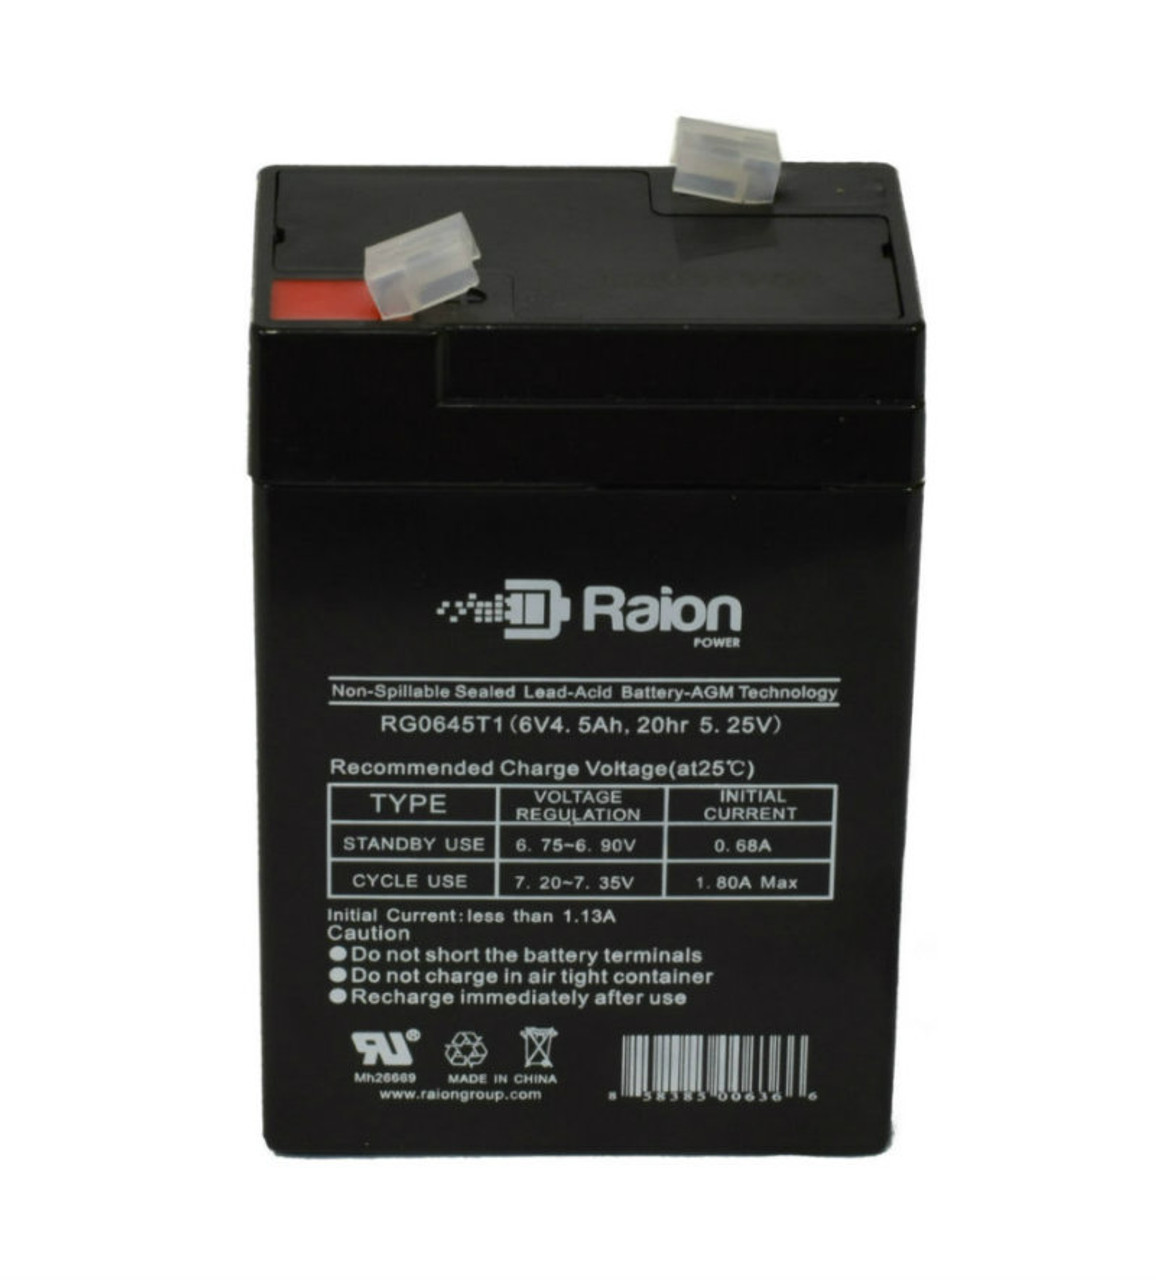 Raion Power RG0645T1 Replacement Battery Cartridge for FirstPower FP660